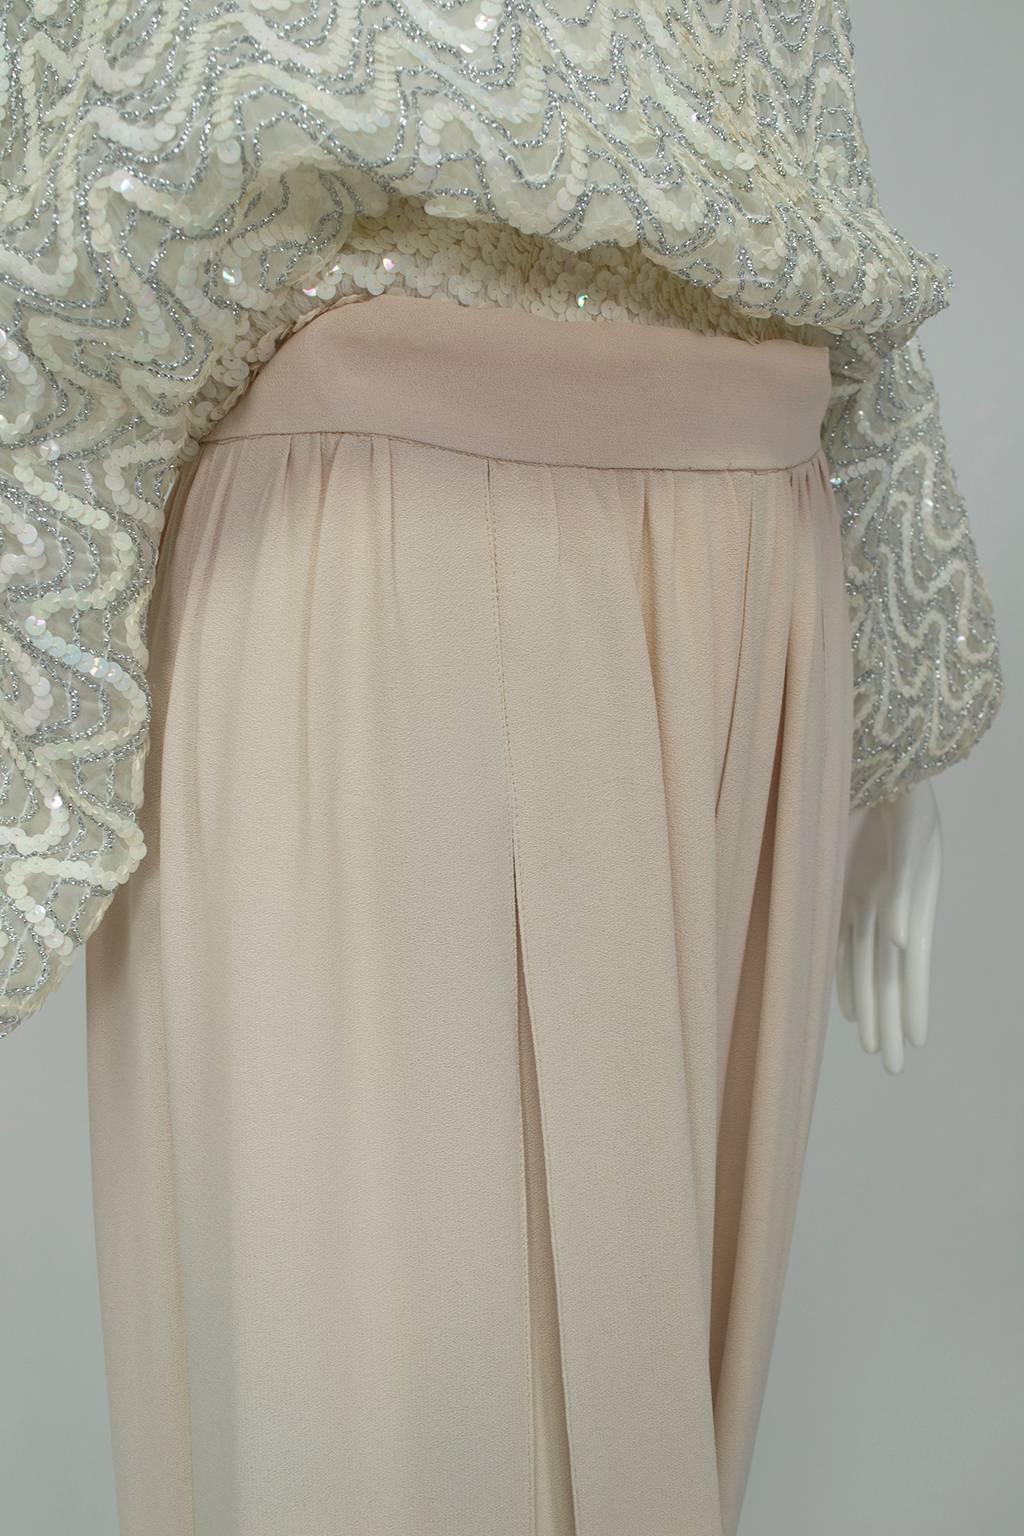 Marrakesh Ivory Sequin Blouson Top and Harem Pant Dinner Pajama Set - S, 1971 For Sale 3